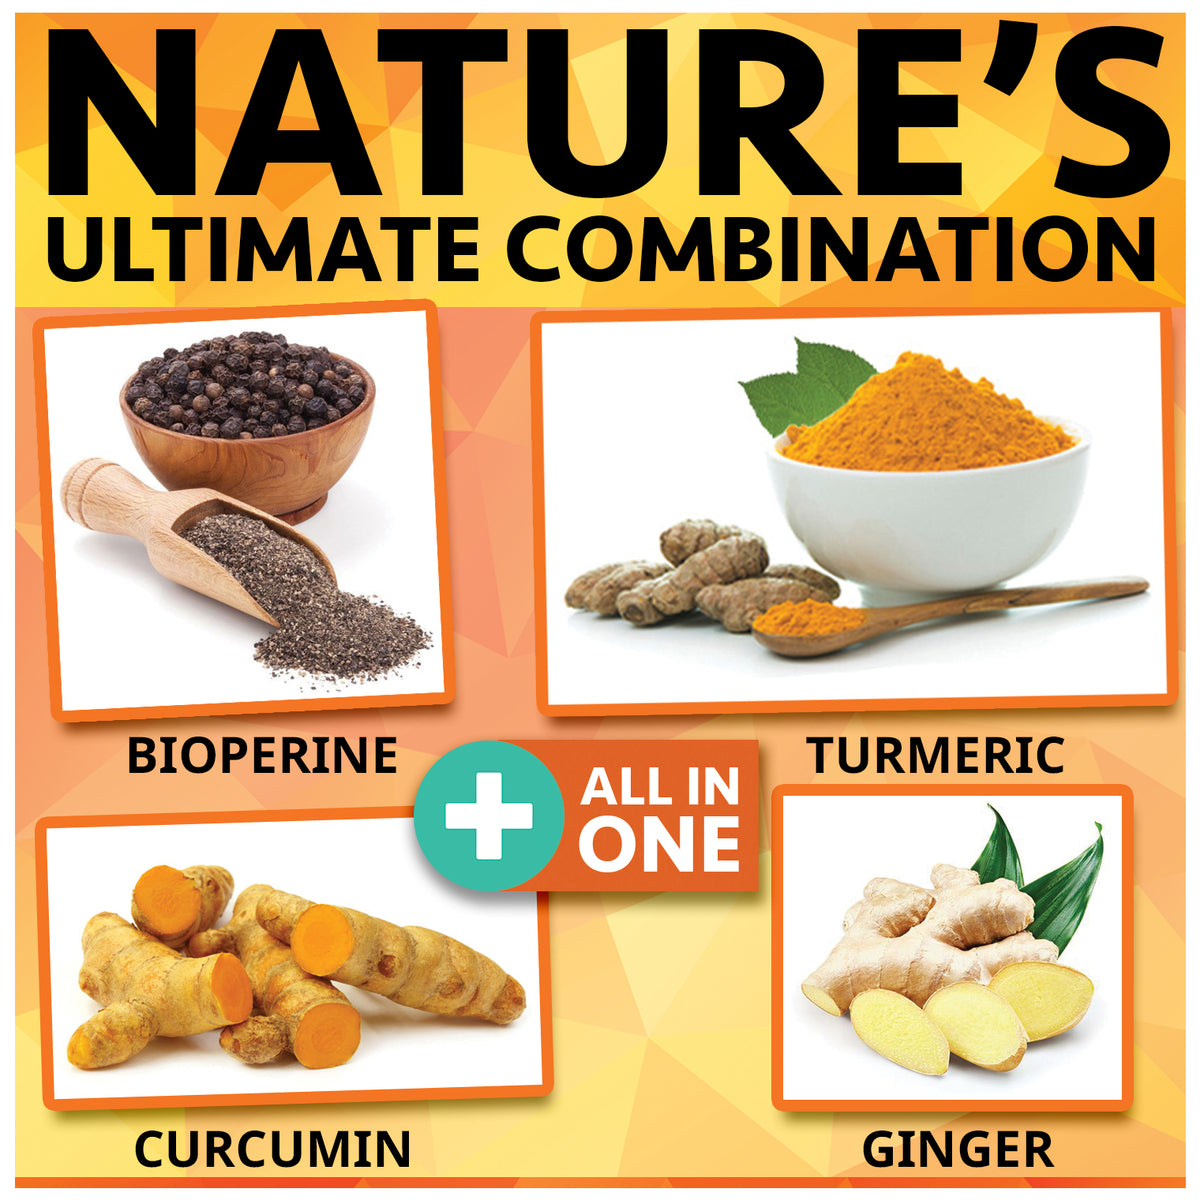 A combination infographic of turmeric curcumin ginger and bioperine